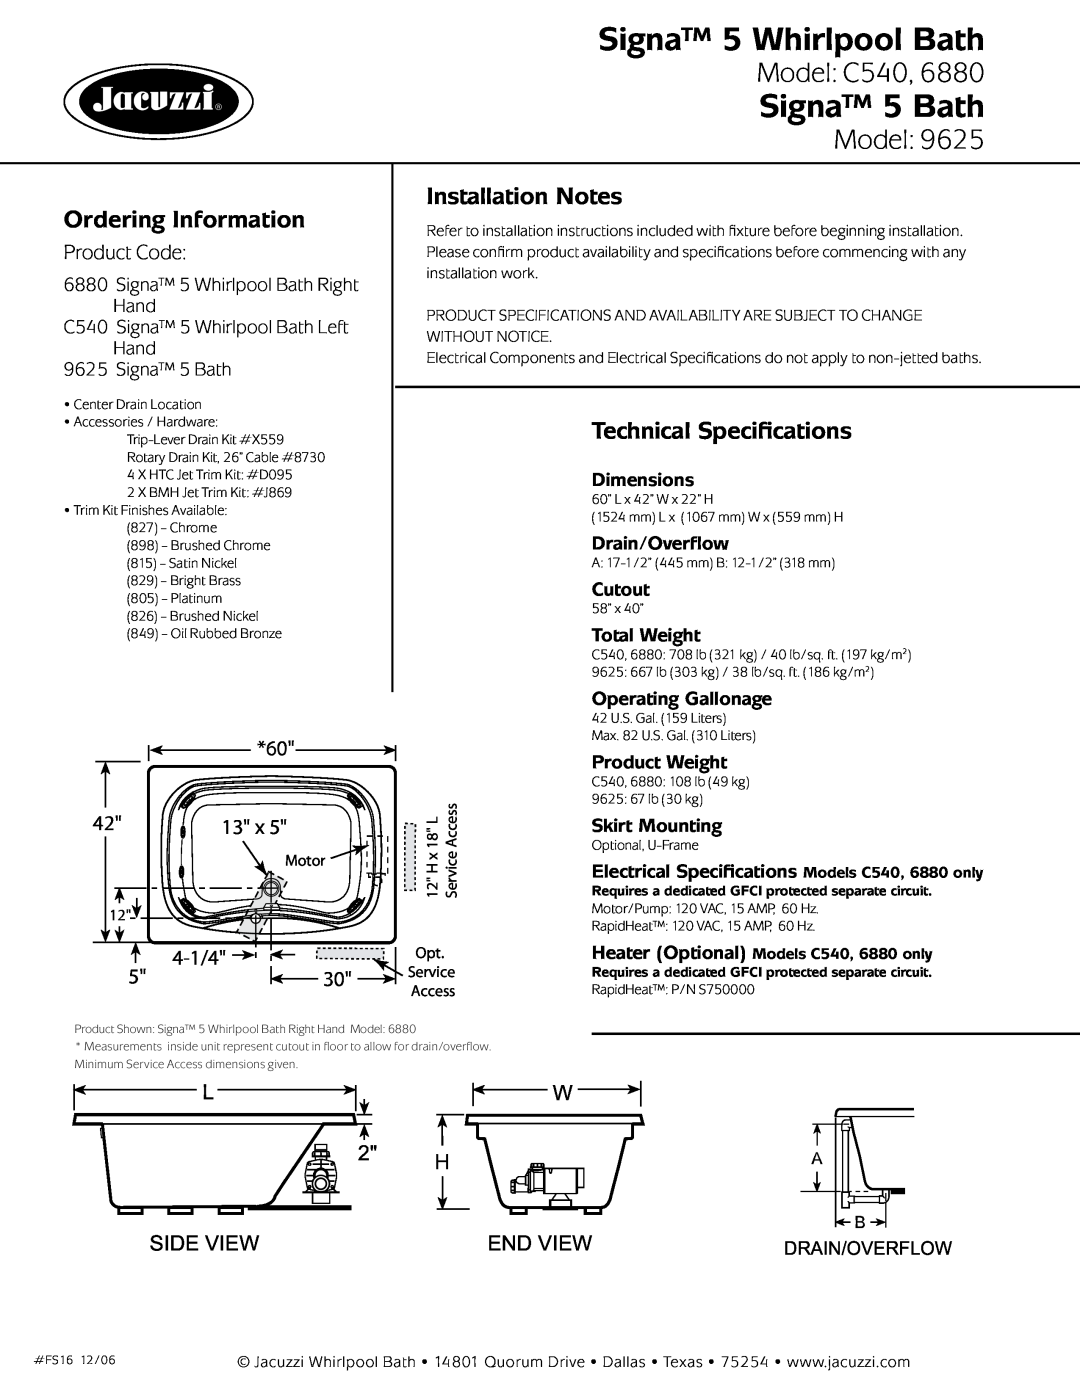 Jacuzzi 9625 Signa 5 Whirlpool Bath, Signa 5 Bath, Model C540, Ordering Information, Installation Notes, Product Code 